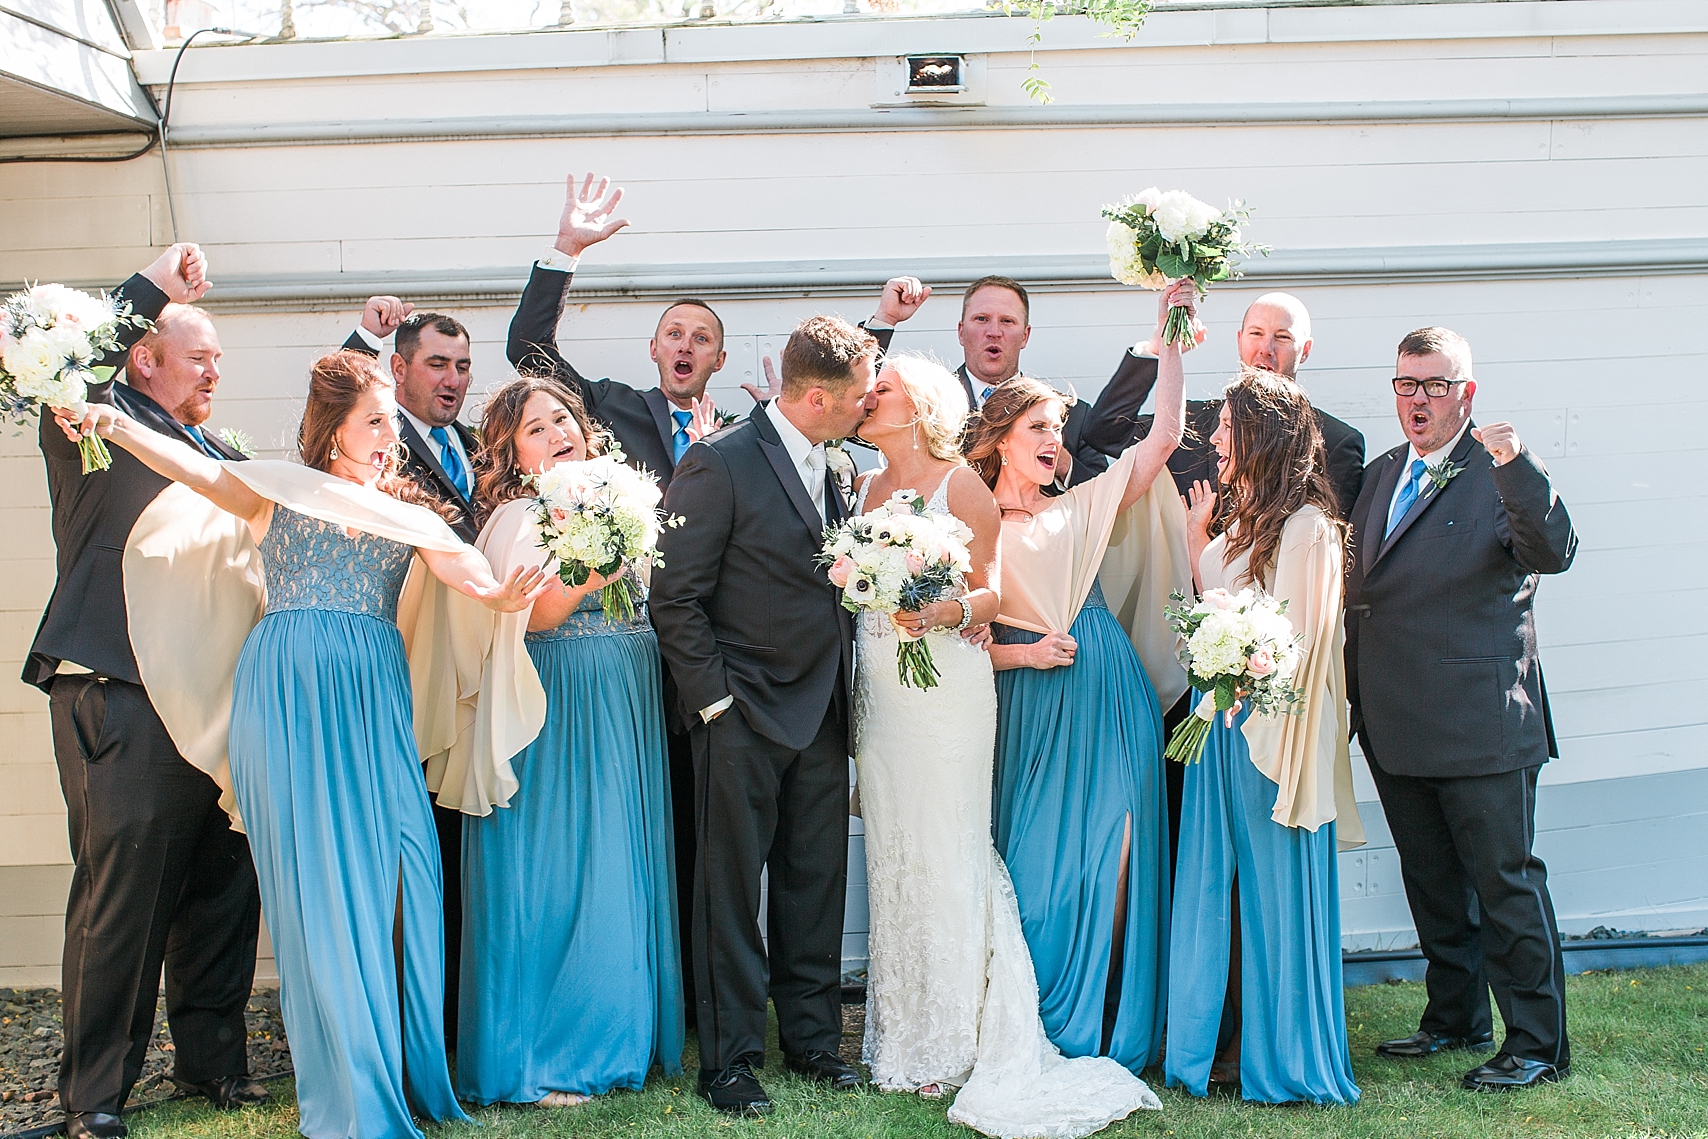 Wedding party cheering in black suits suits and blue dresses on wedding day at the Chart House Summer Wedding Lakeville Minnesota Minneapolis Wedding Photographer Mallory Kiesow